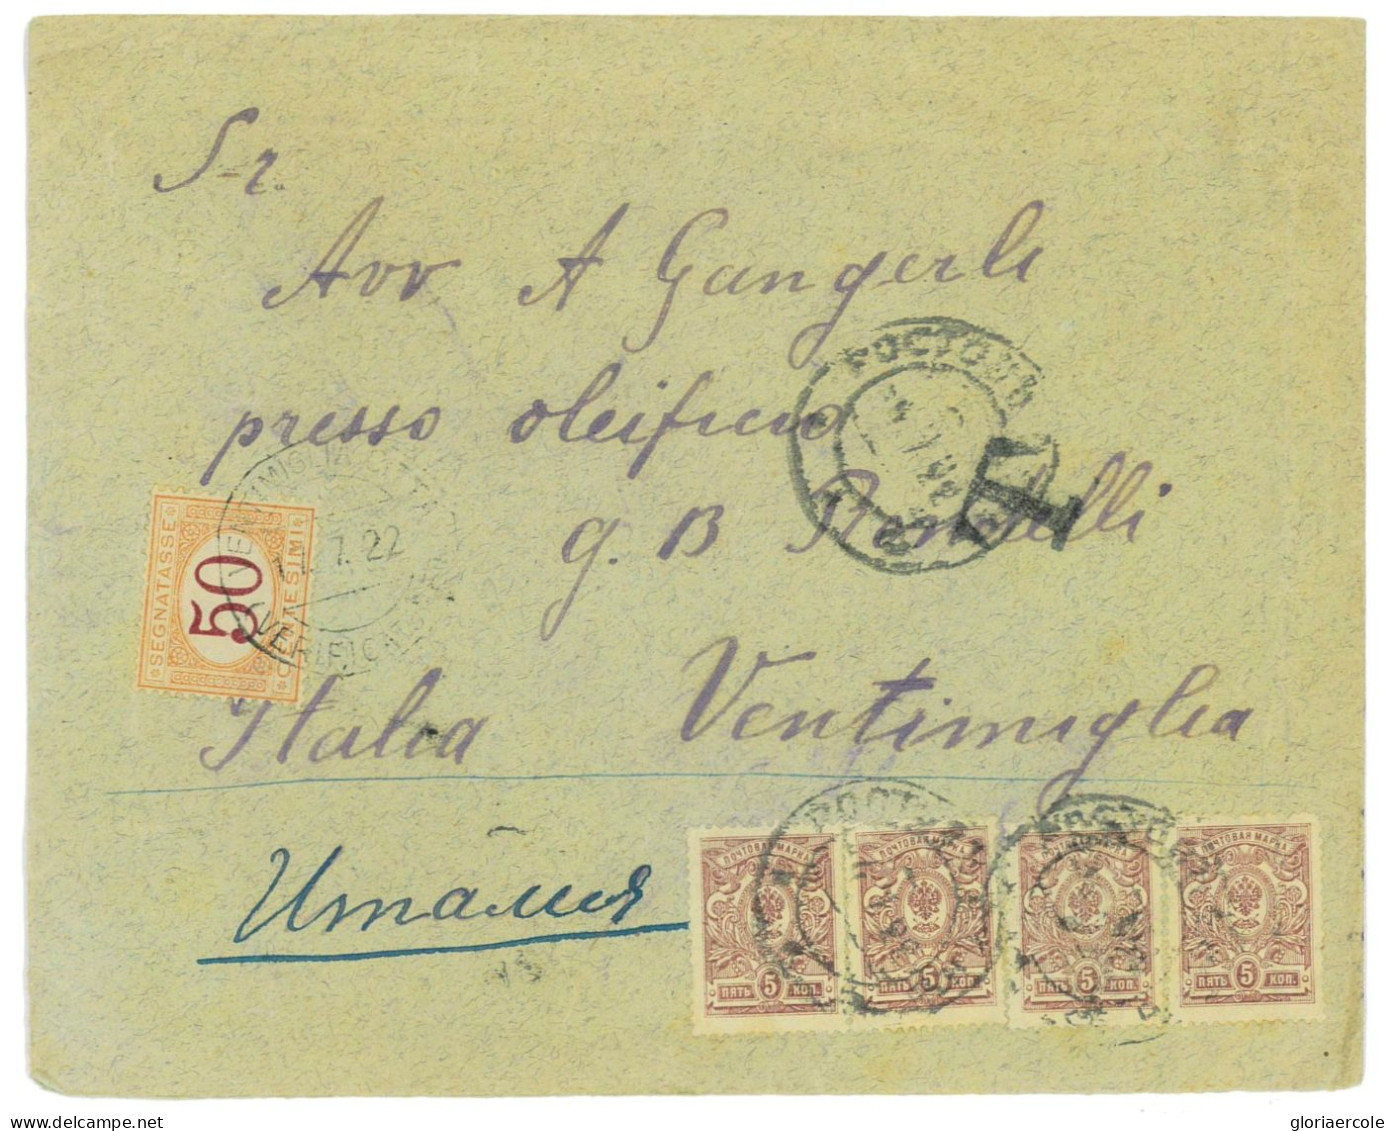 P2922 - RUSSIA, 1922, LETTER, FRANKED WITH ONLY 20 KOPEK TO ITALY, TAXED ON ARRIVAL 50 CENT. - Briefe U. Dokumente